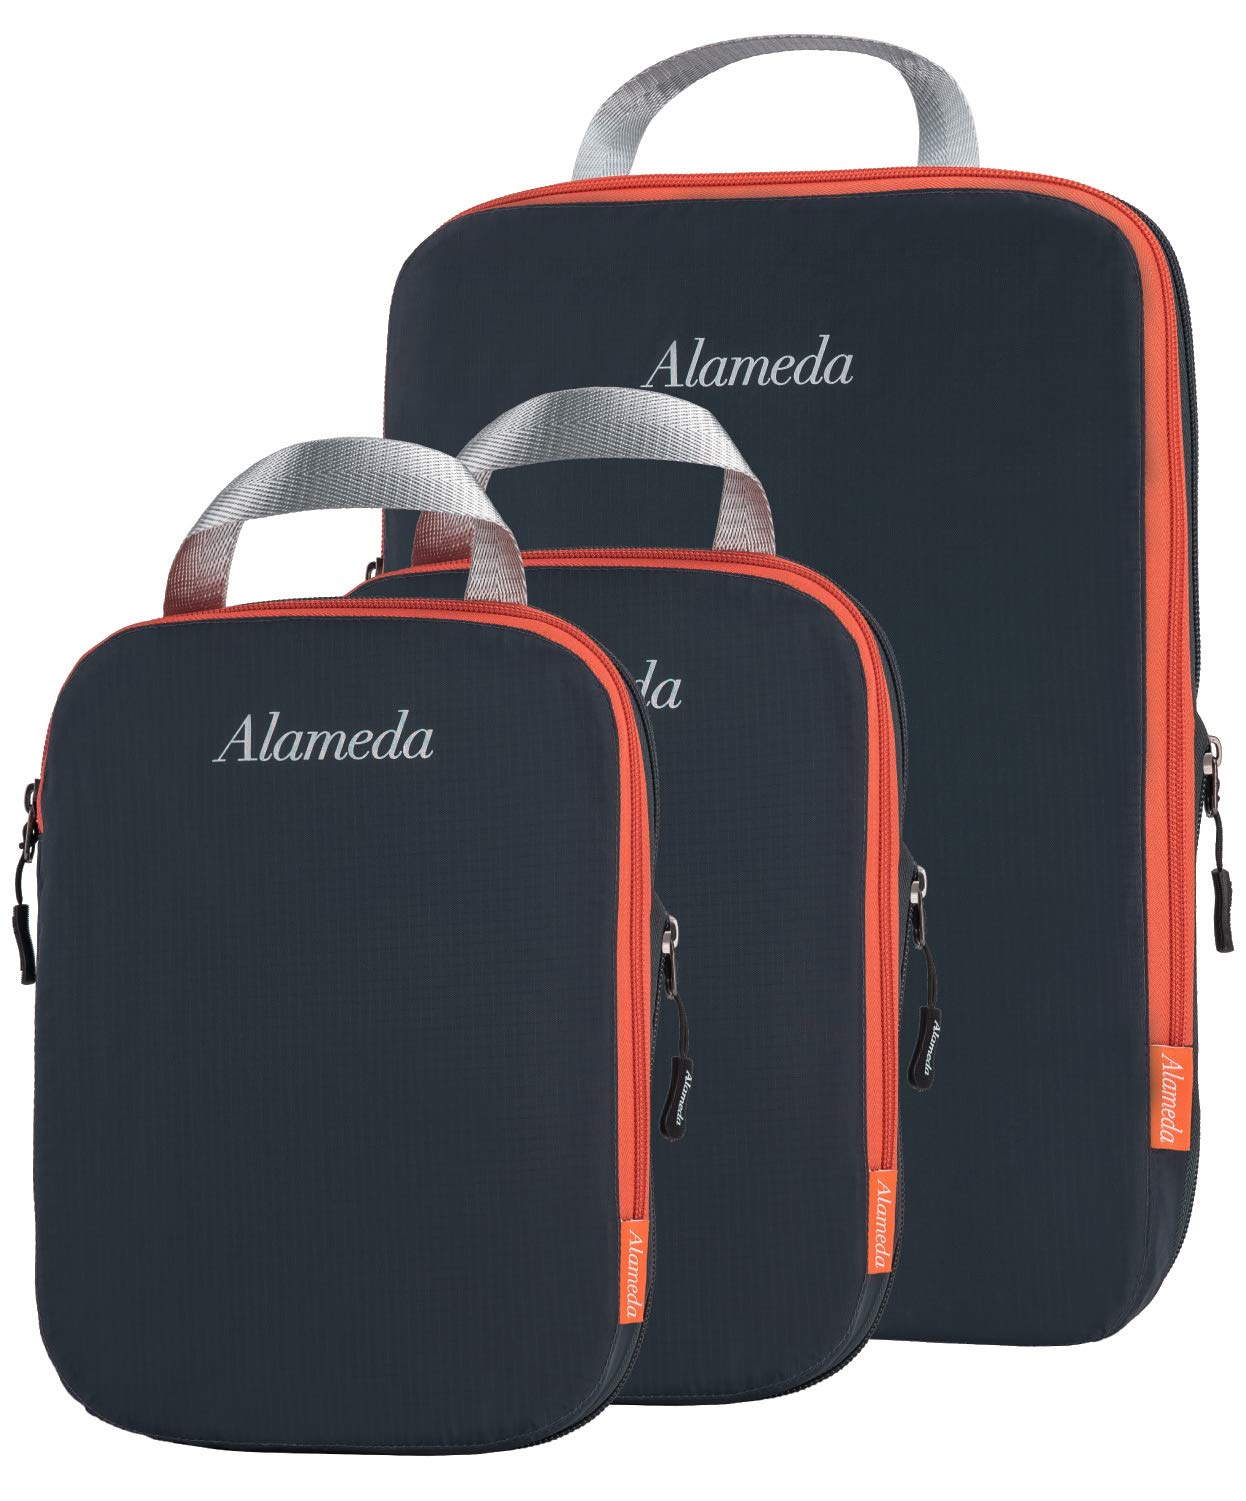 Alameda Packing Cube Set 3Pcs For Travel,Compression Bags